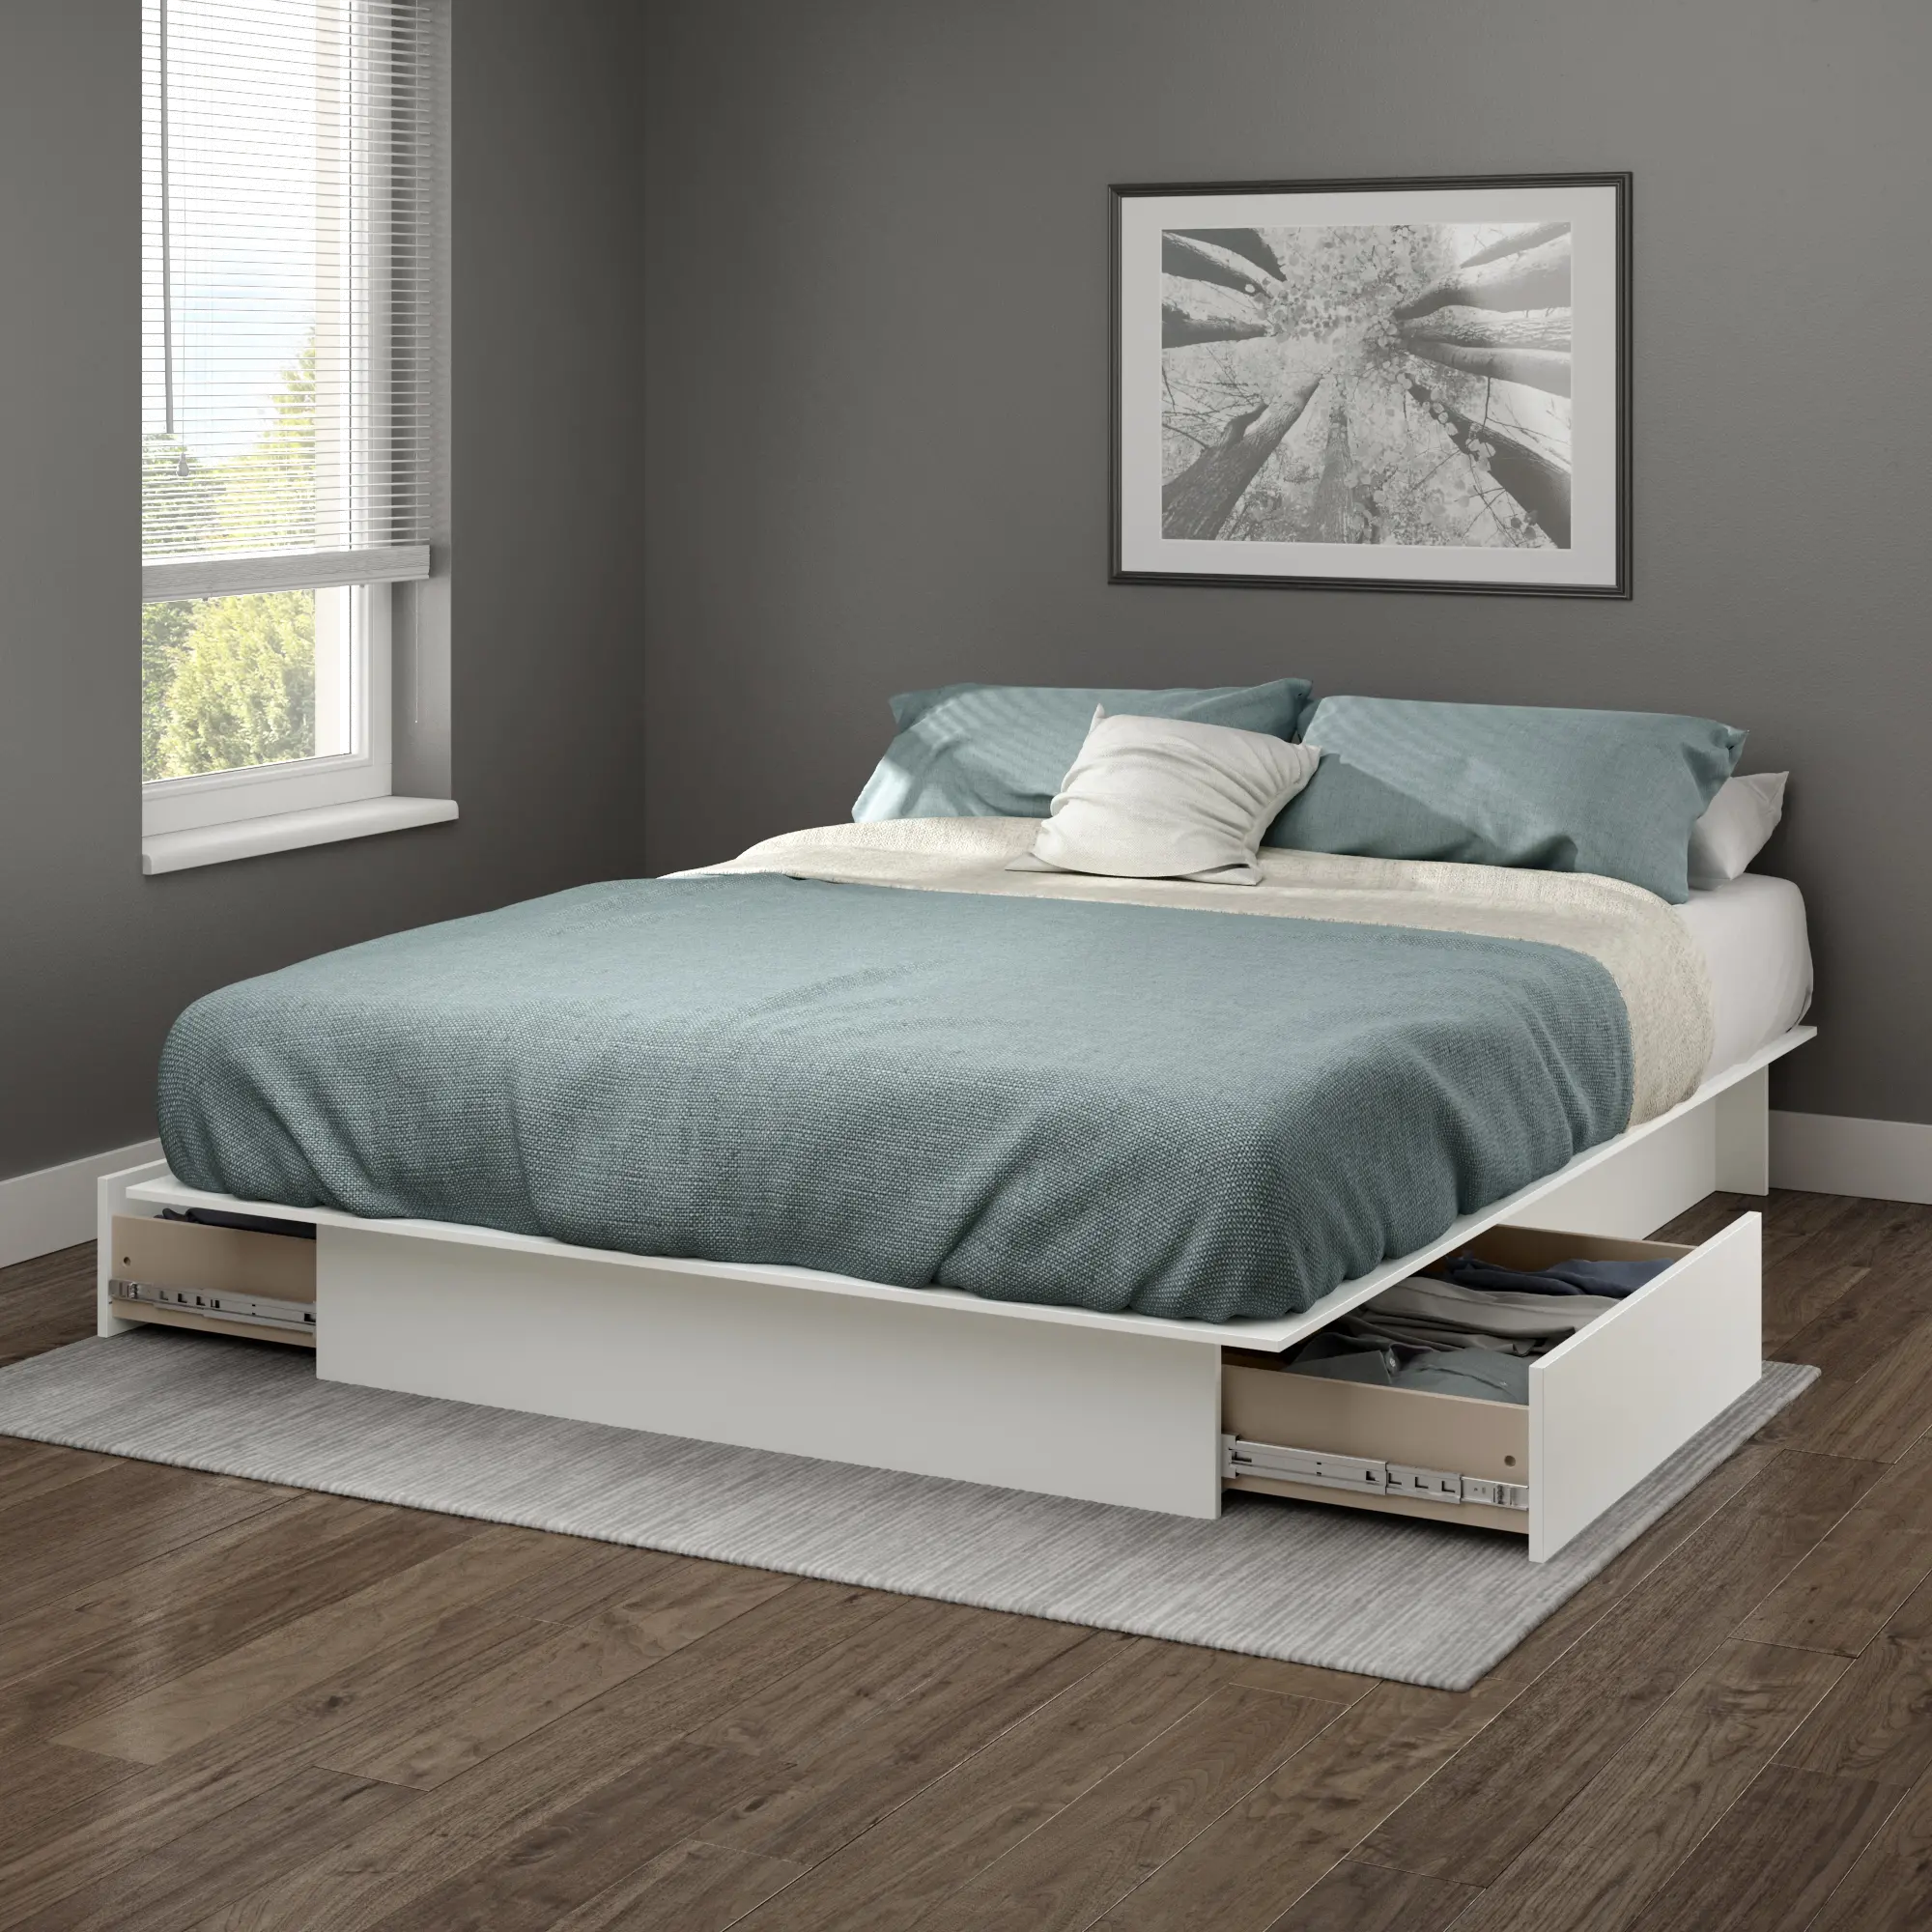 Gramercy White Full-Queen Platform Bed with Drawers - South Shore